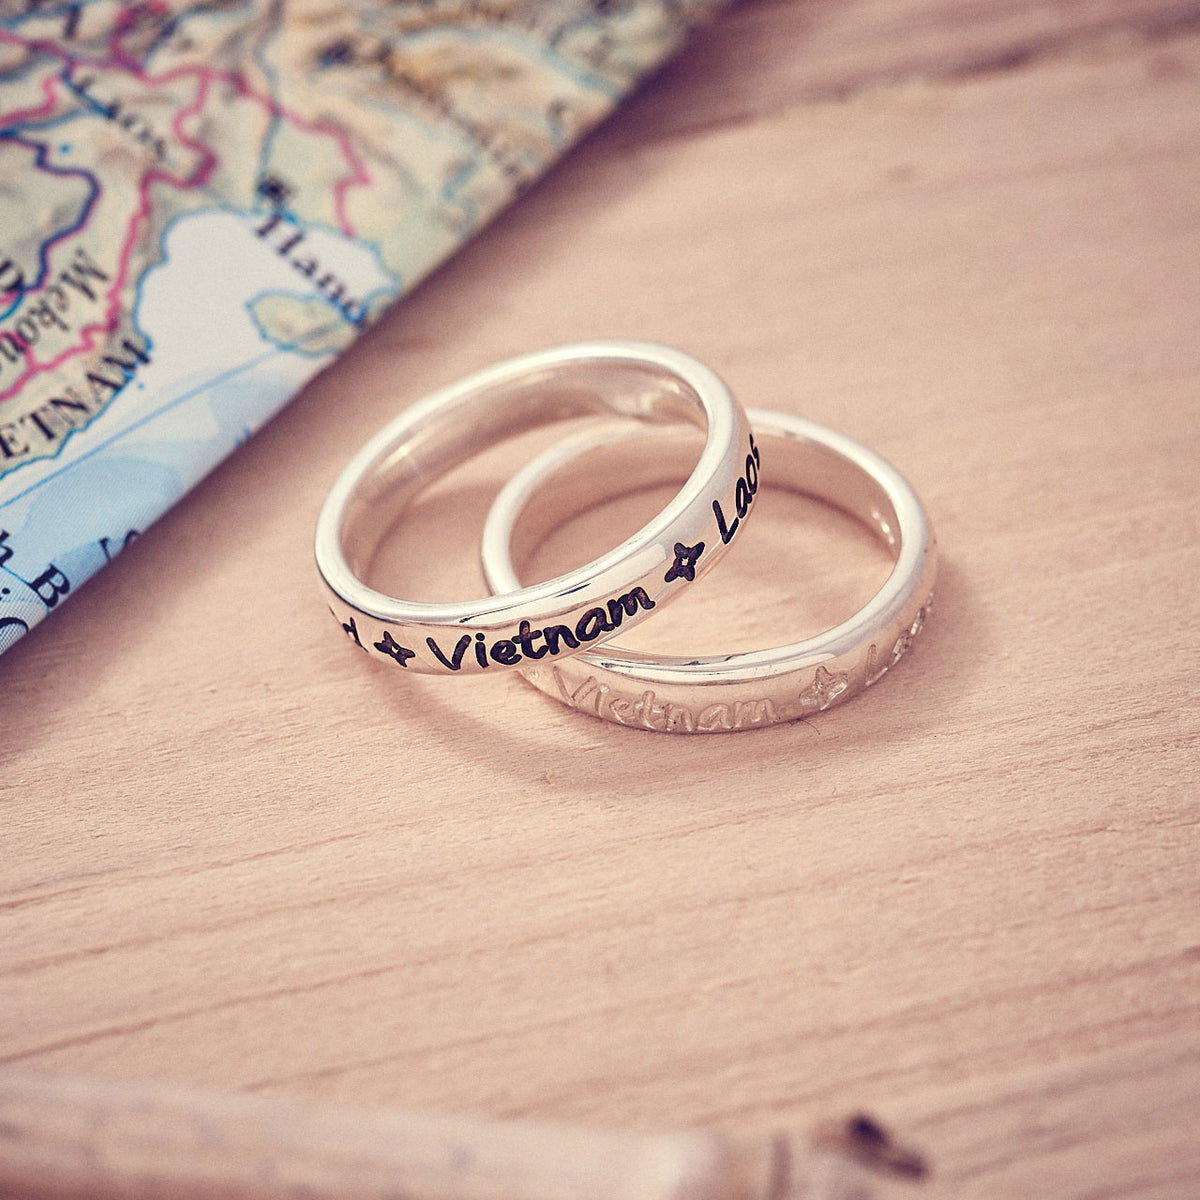 Round The World Personalised Travel Ring, unusual gift for a friend going travelling